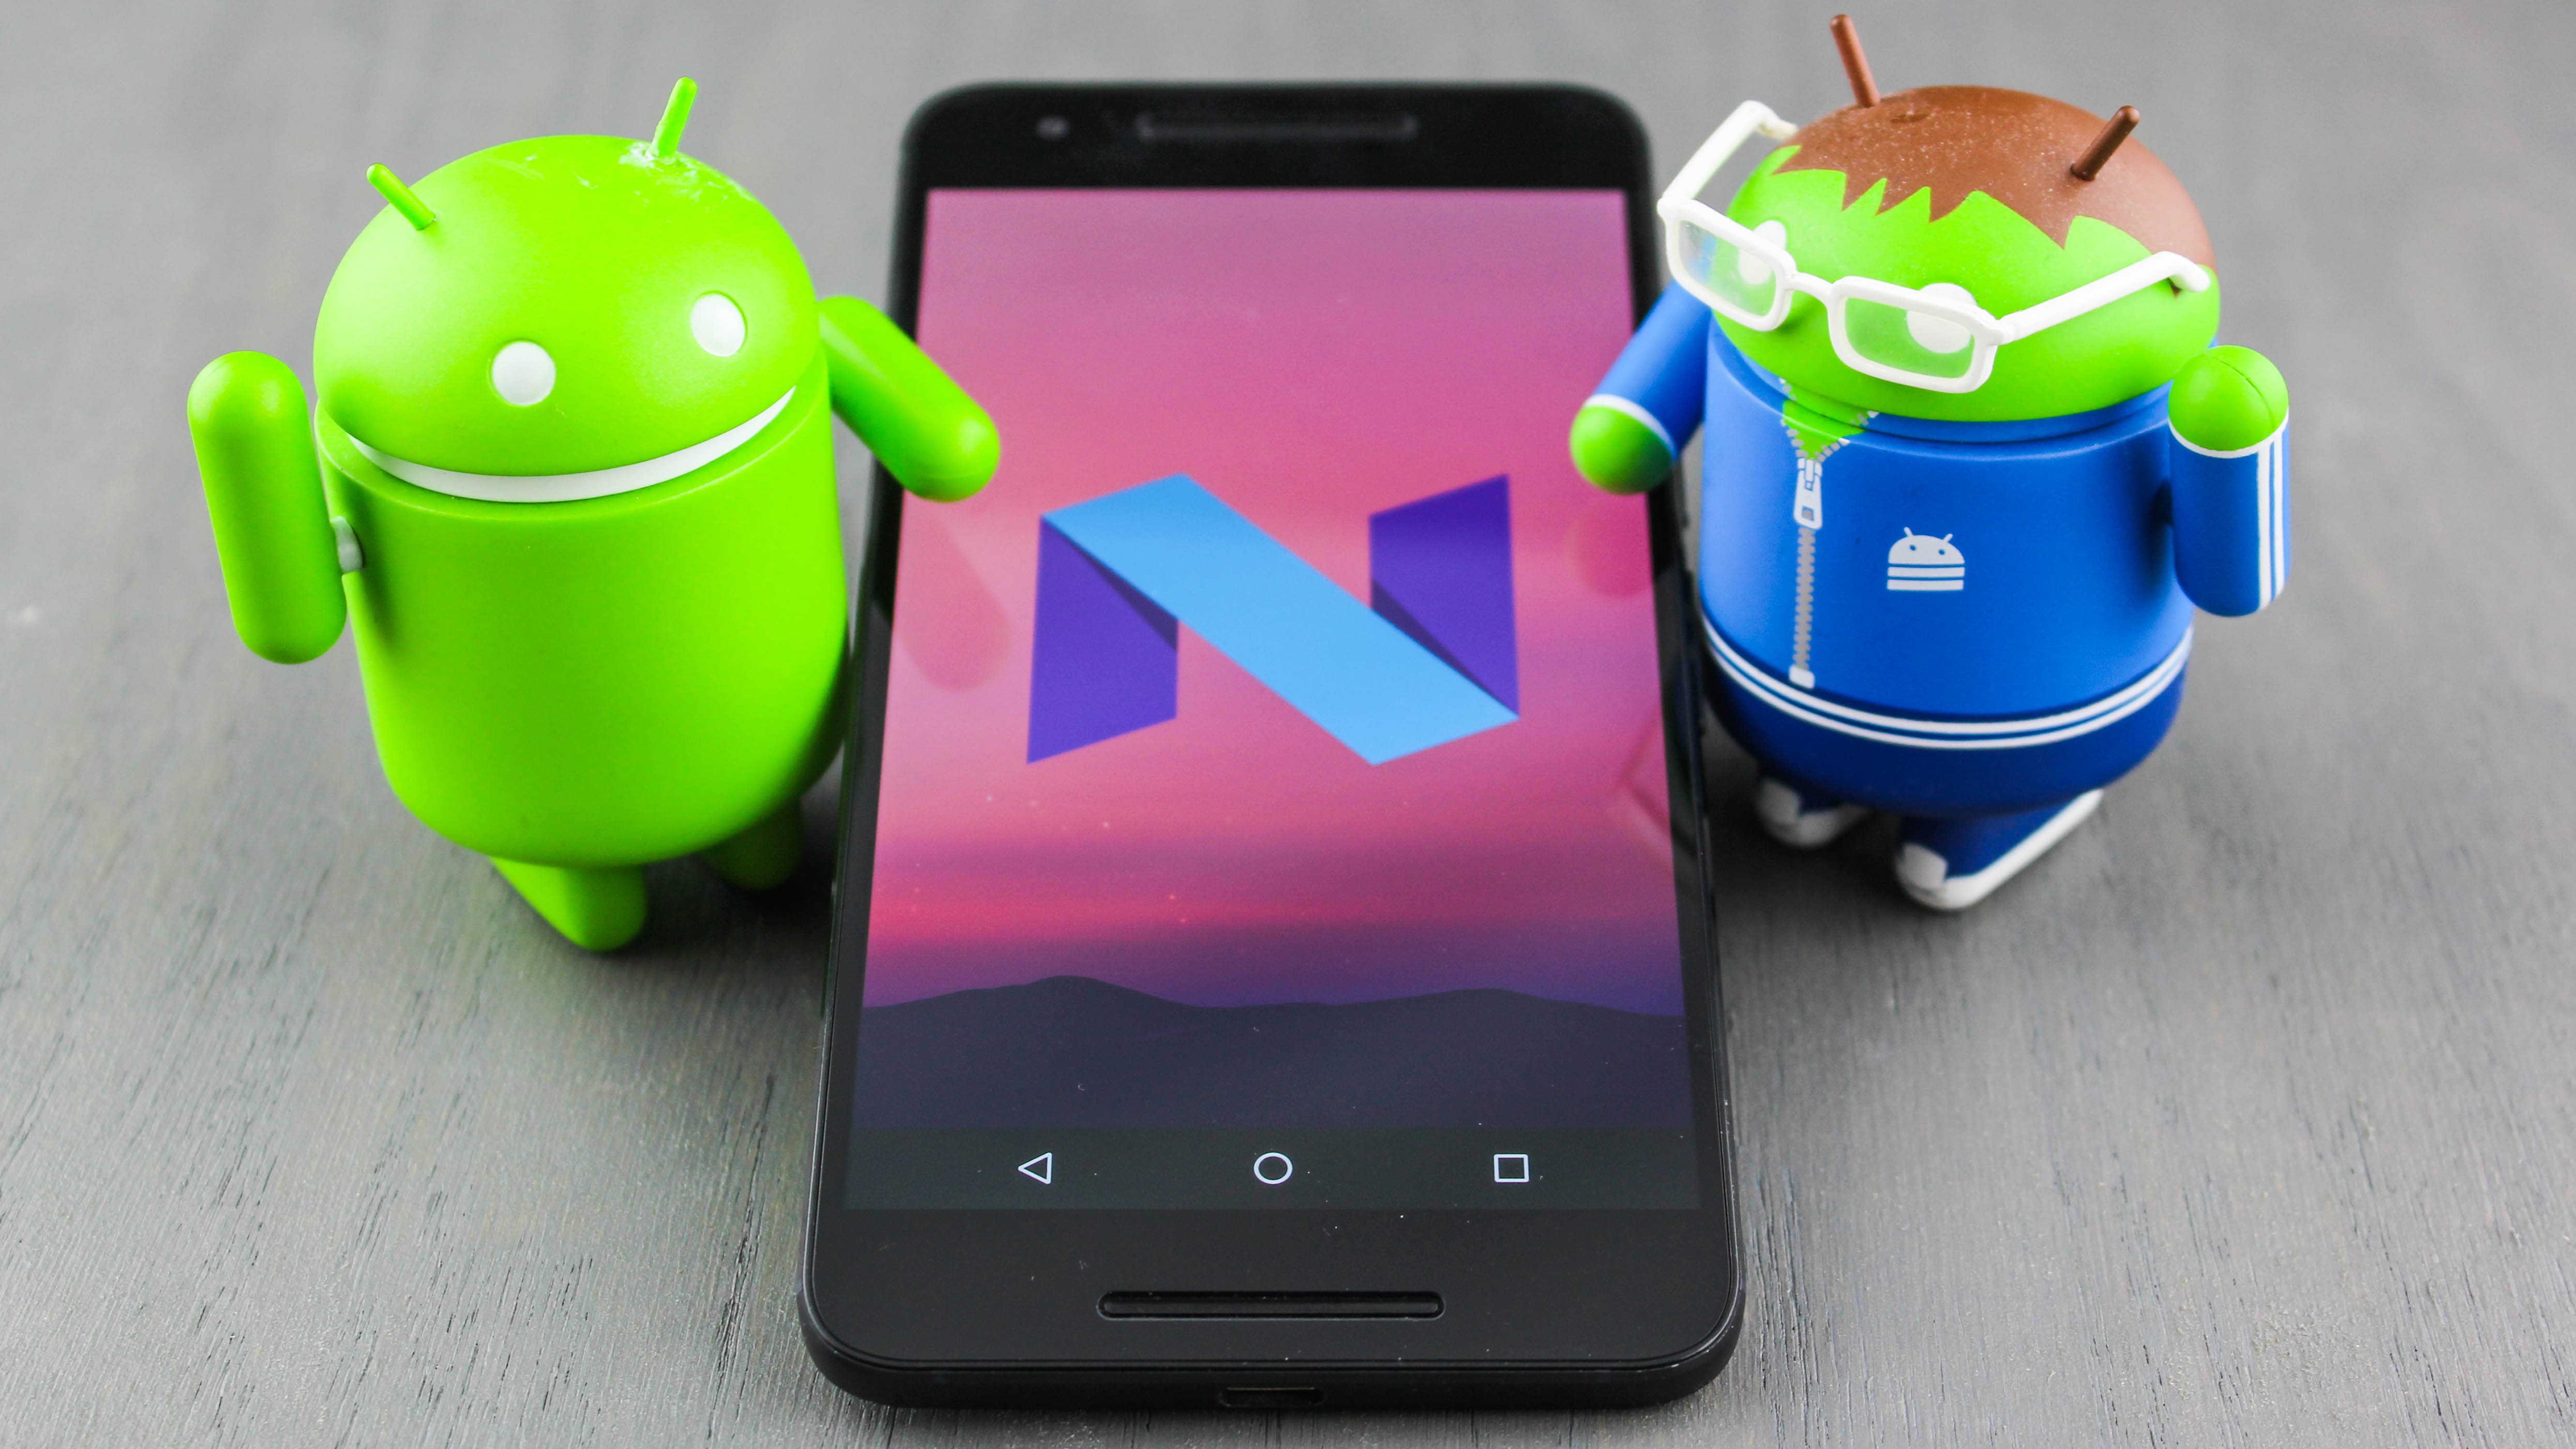 smartphones Android Nougat 7.1 browsers internet